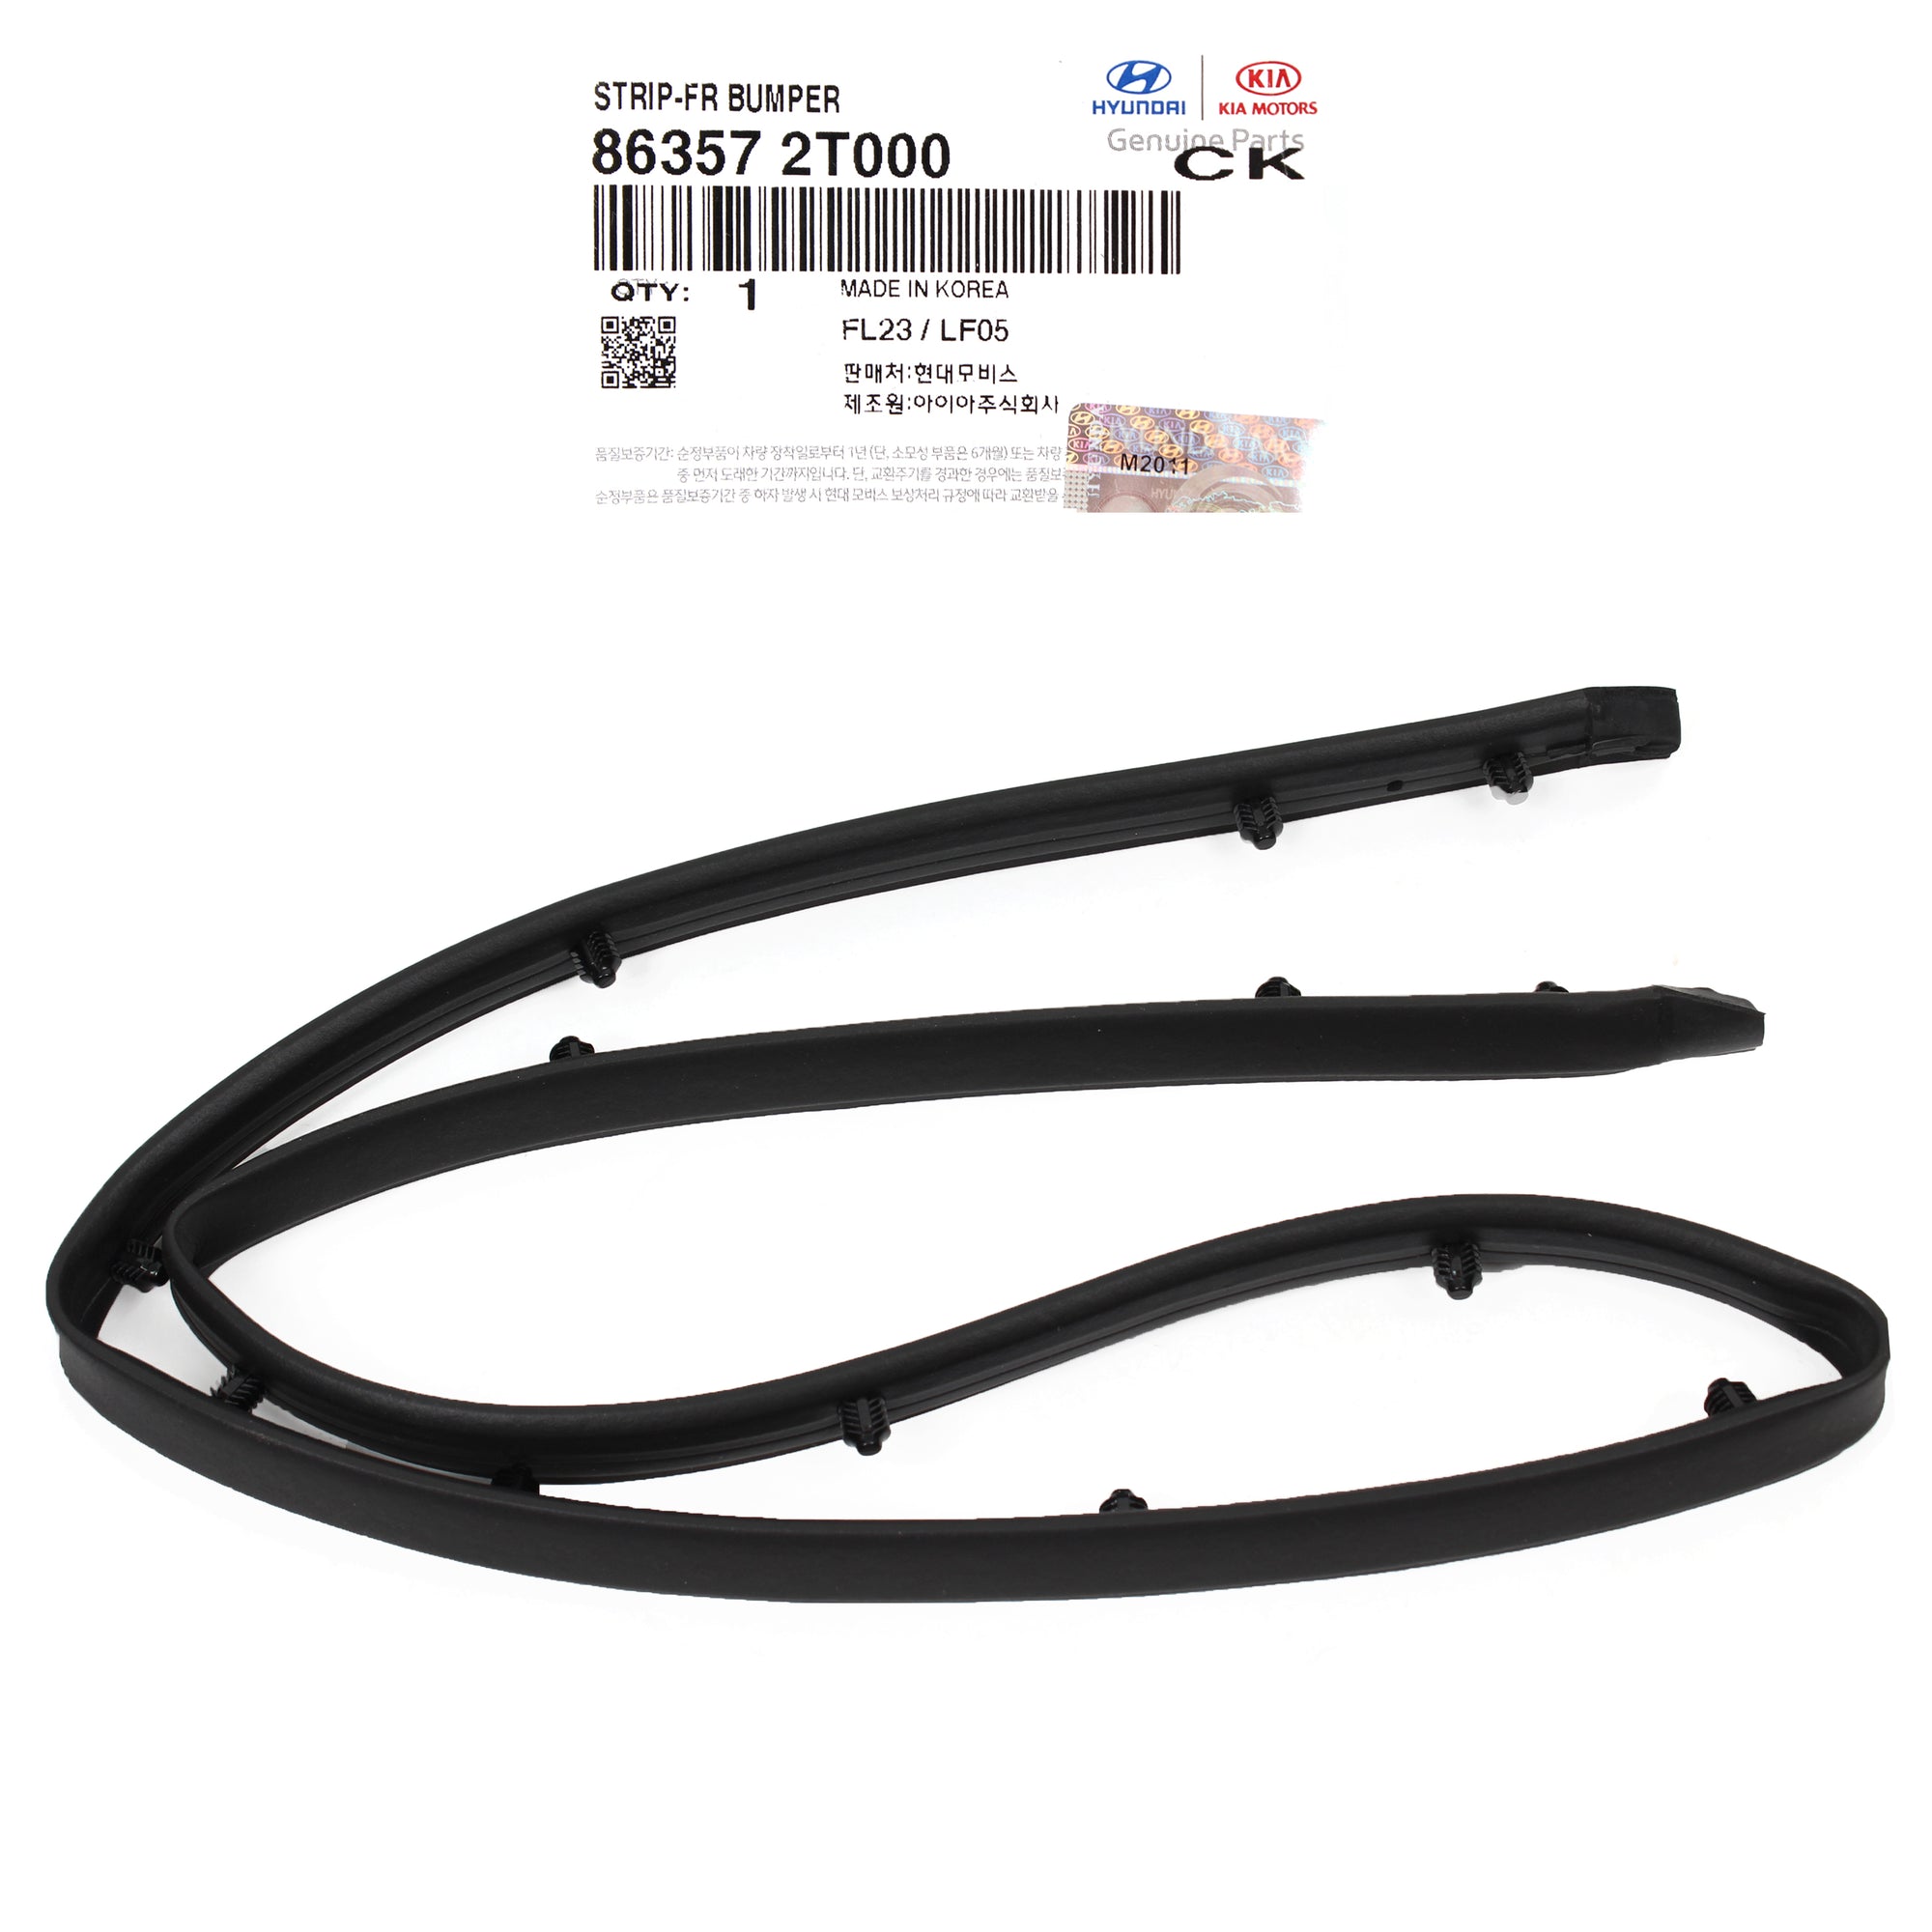 OEM Front Hood Sight Shield Strip Rubber Seal for 11-16 Kia Optima 863572T000